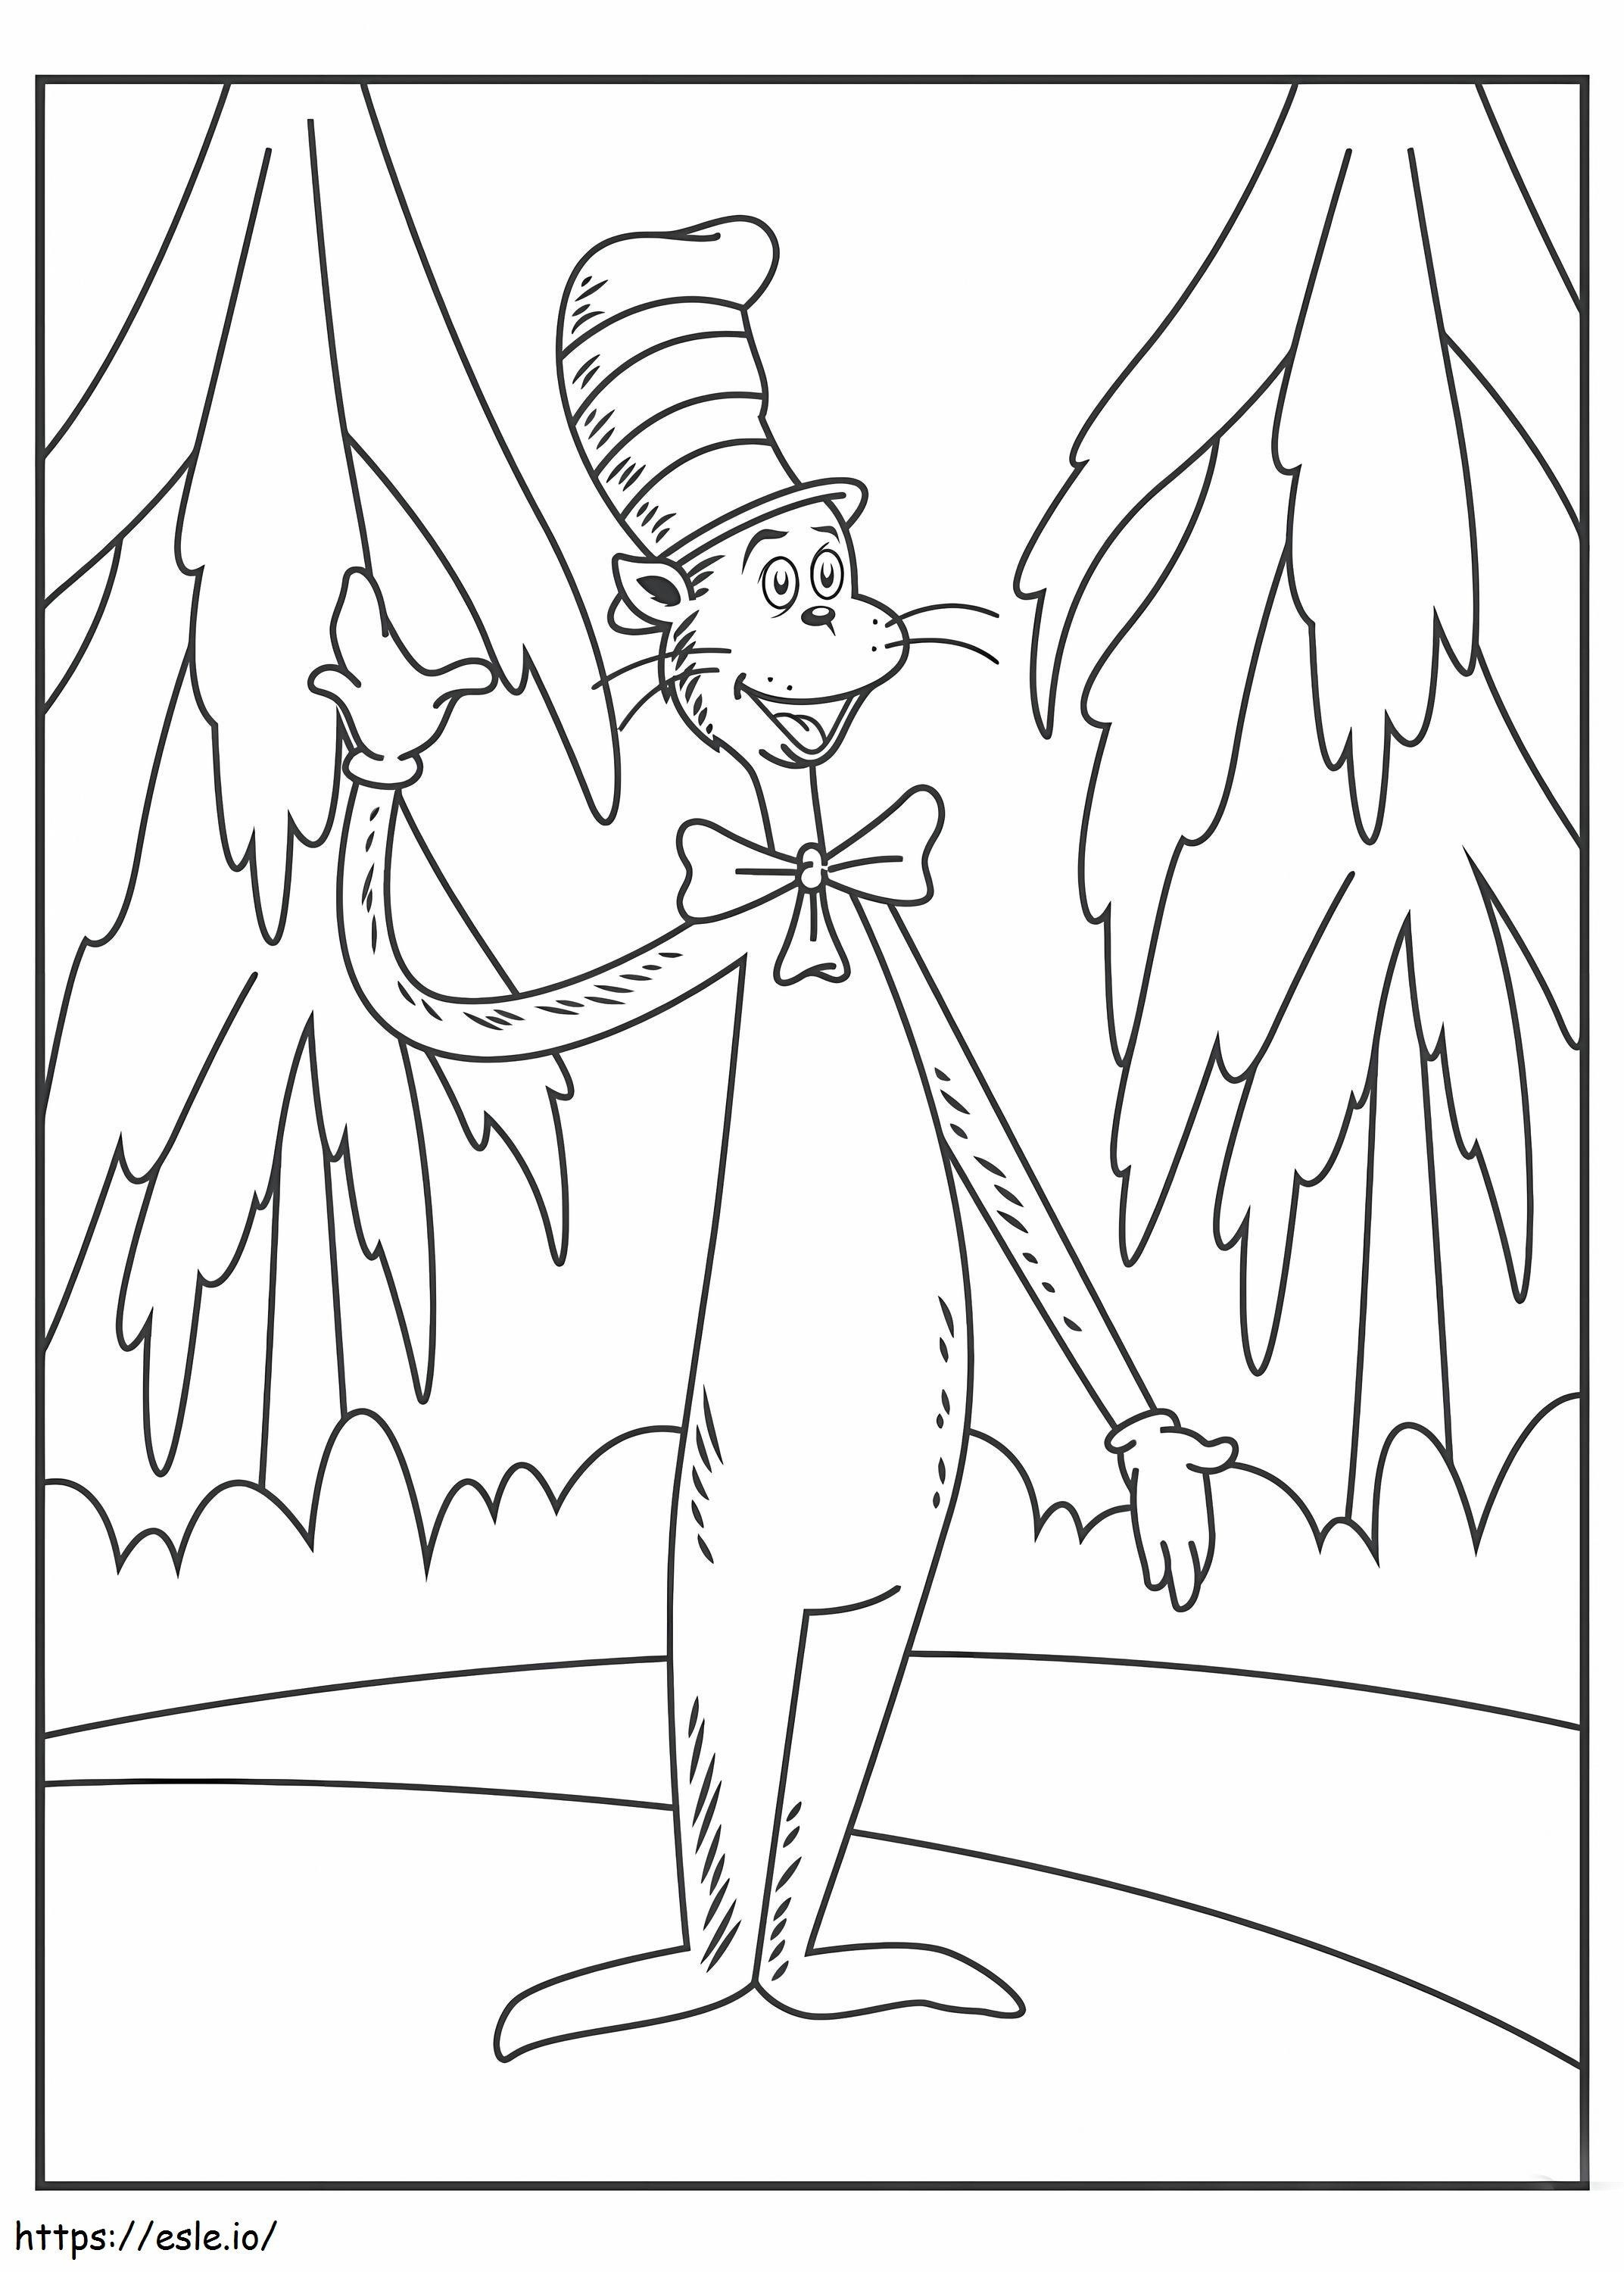 Cat In The Hat coloring page